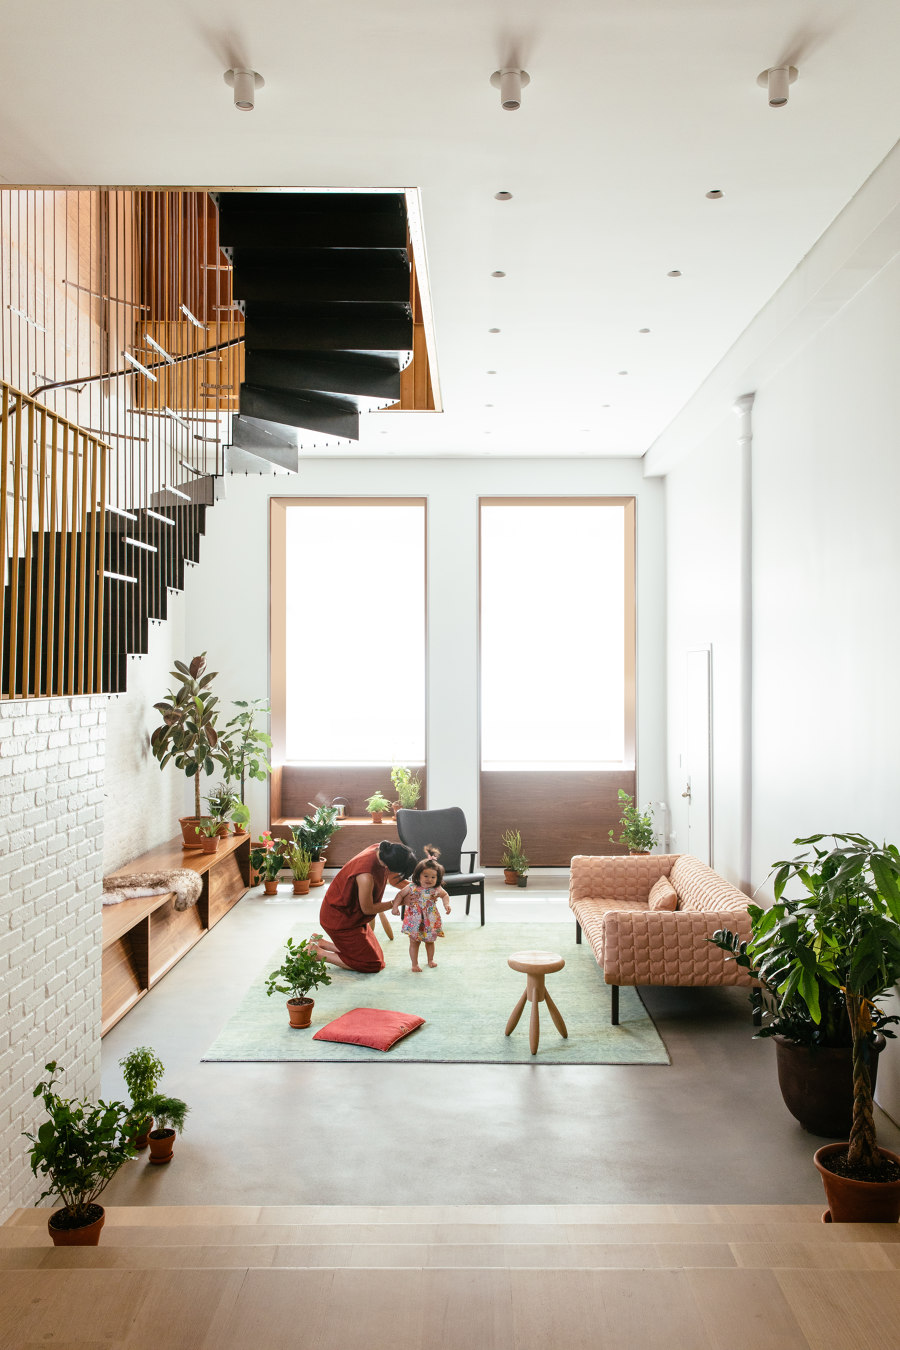 Friends in high places: loft living | Novedades